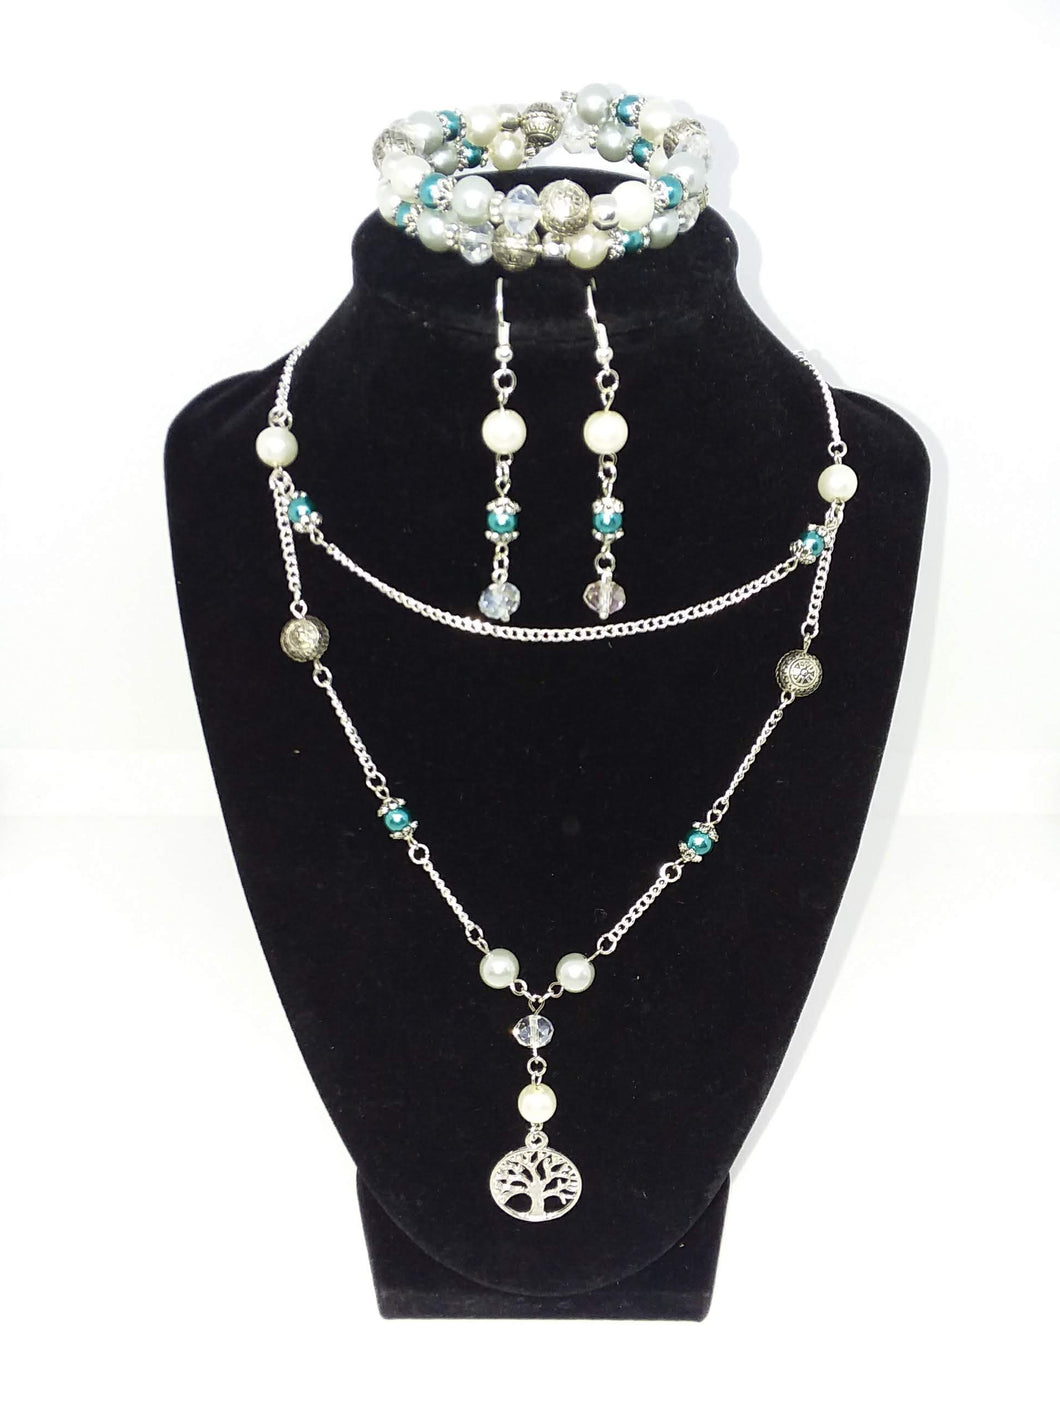 Handmade Glass Beaded Metal Charm Pendants with Silver Plated Earrings and Chain Necklace Jewelry Set Tree of Life